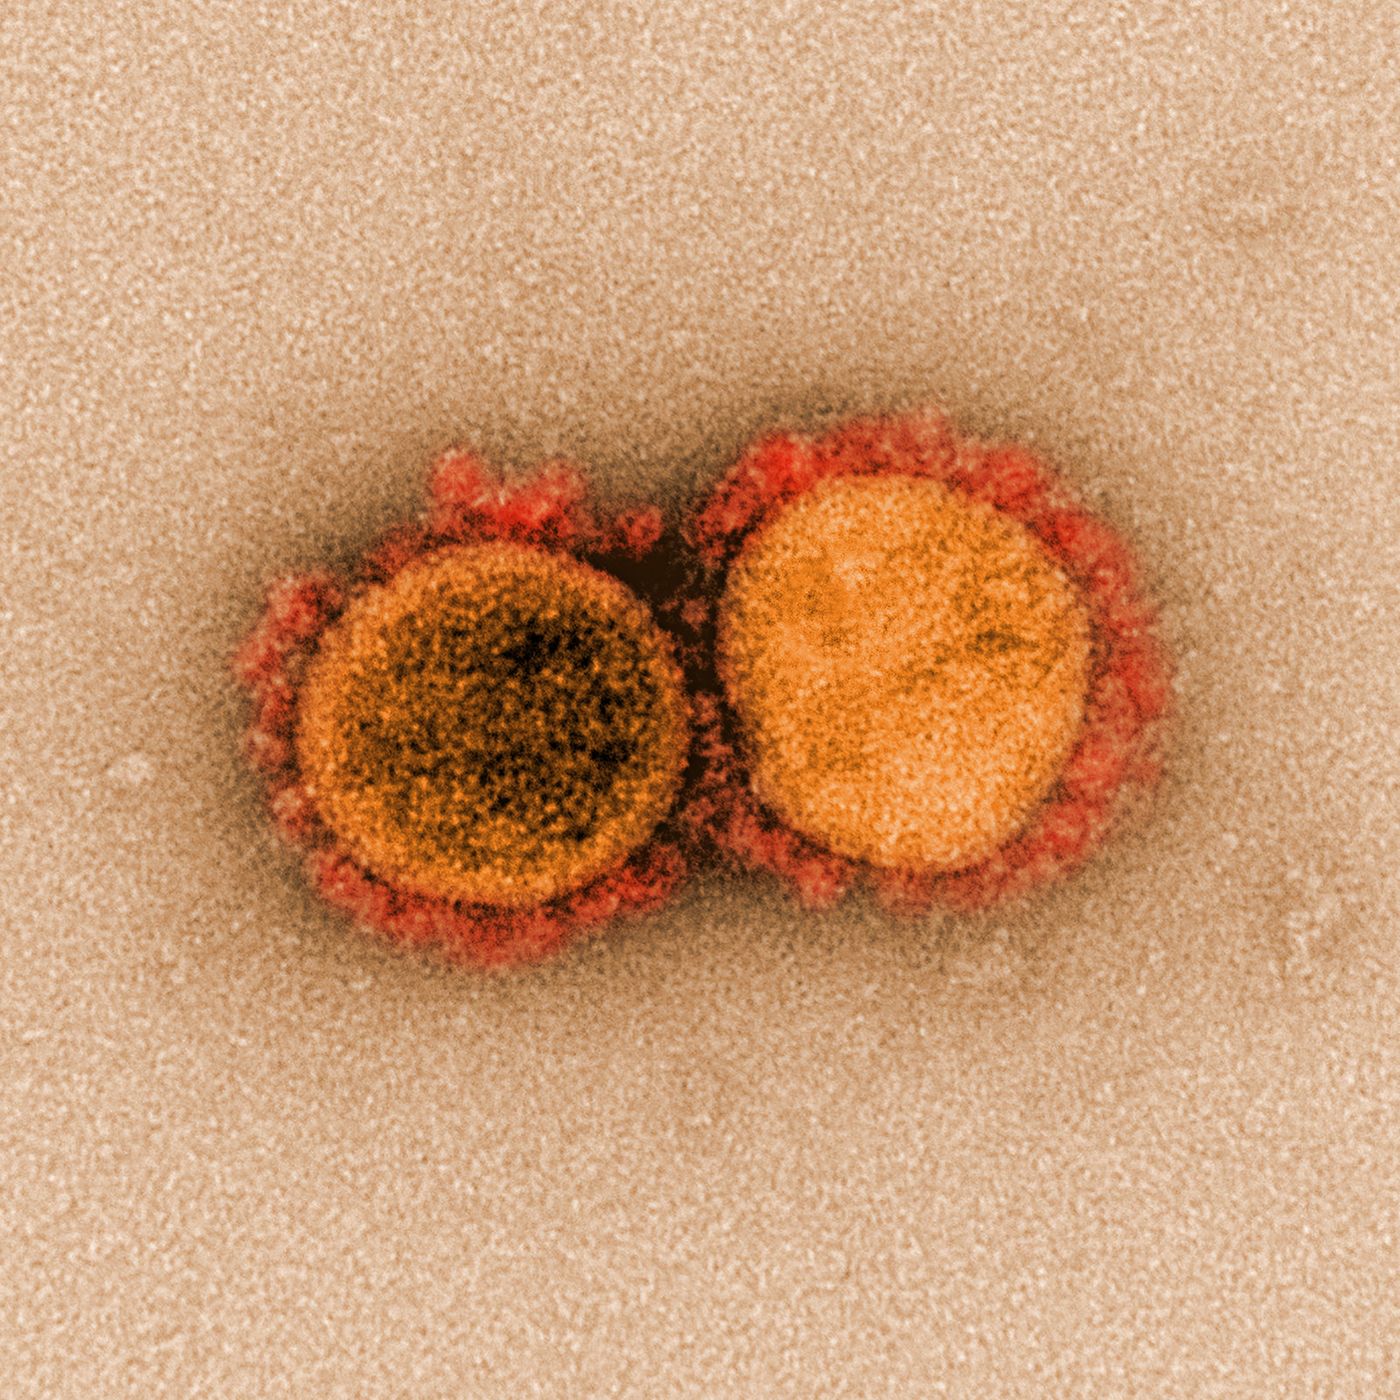 Transmission electron micrograph of SARS-CoV-2 virus particles, isolated from a patient. Image captured and color-enhanced at the NIAID Integrated Research Facility (IRF) in Fort Detrick, Maryland. Credit: NIAID